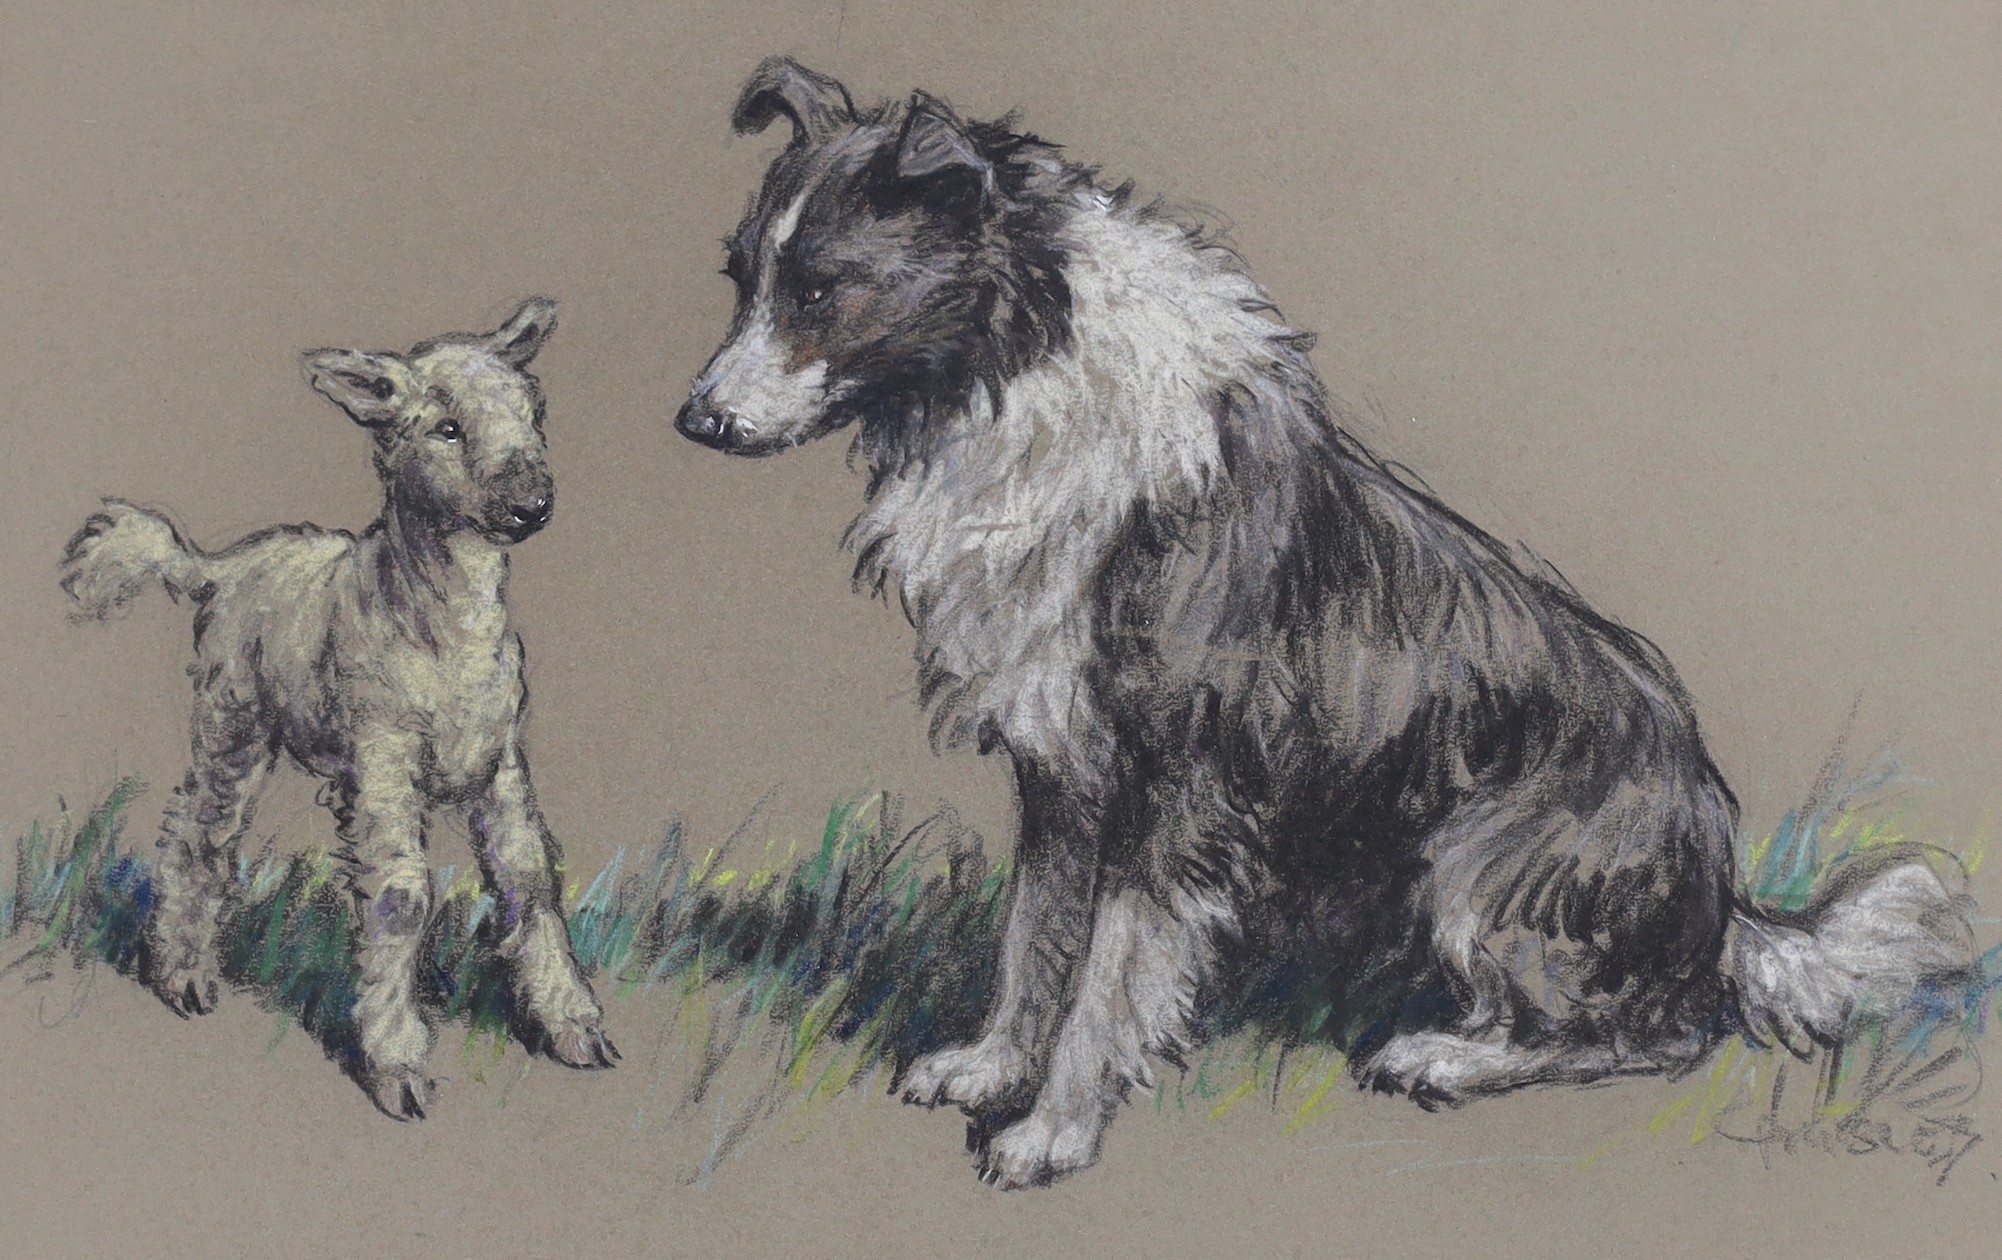 Christopher Gifford Ambler (1886-1965), two pastels, 'Best Friends' and 'Play Ball', signed, c.1945, 20 x 32cm and 22 x 28cm, unframed